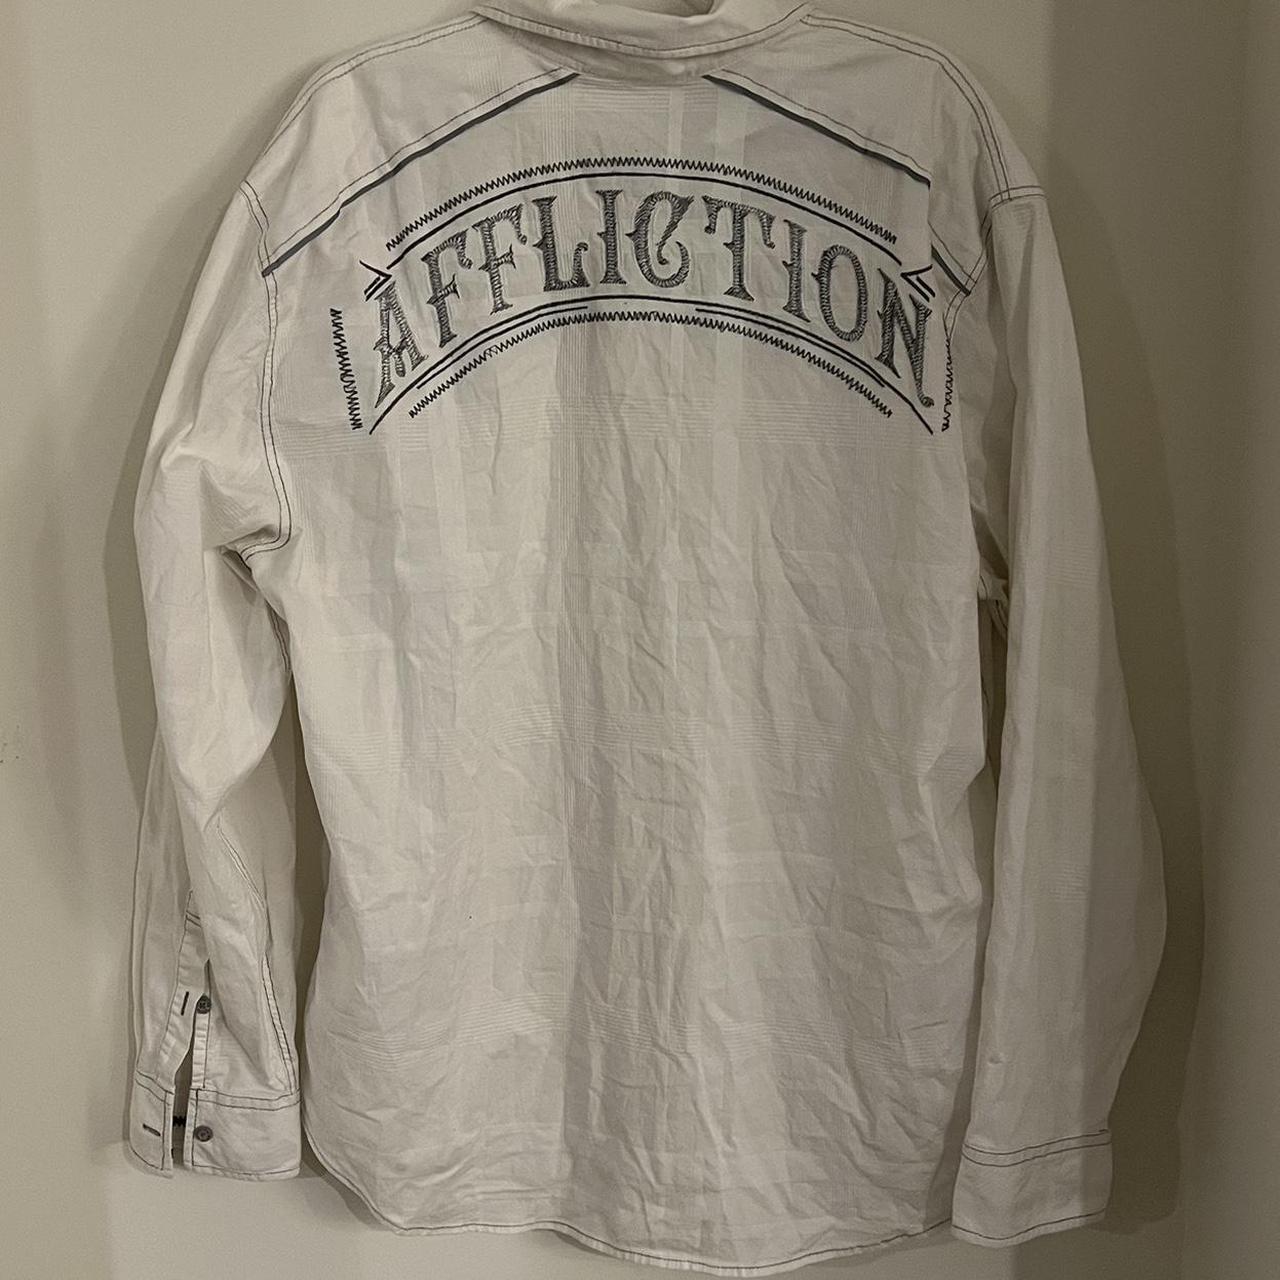 Affliction shirt ⚡️ Grey lining is reflective size... - Depop